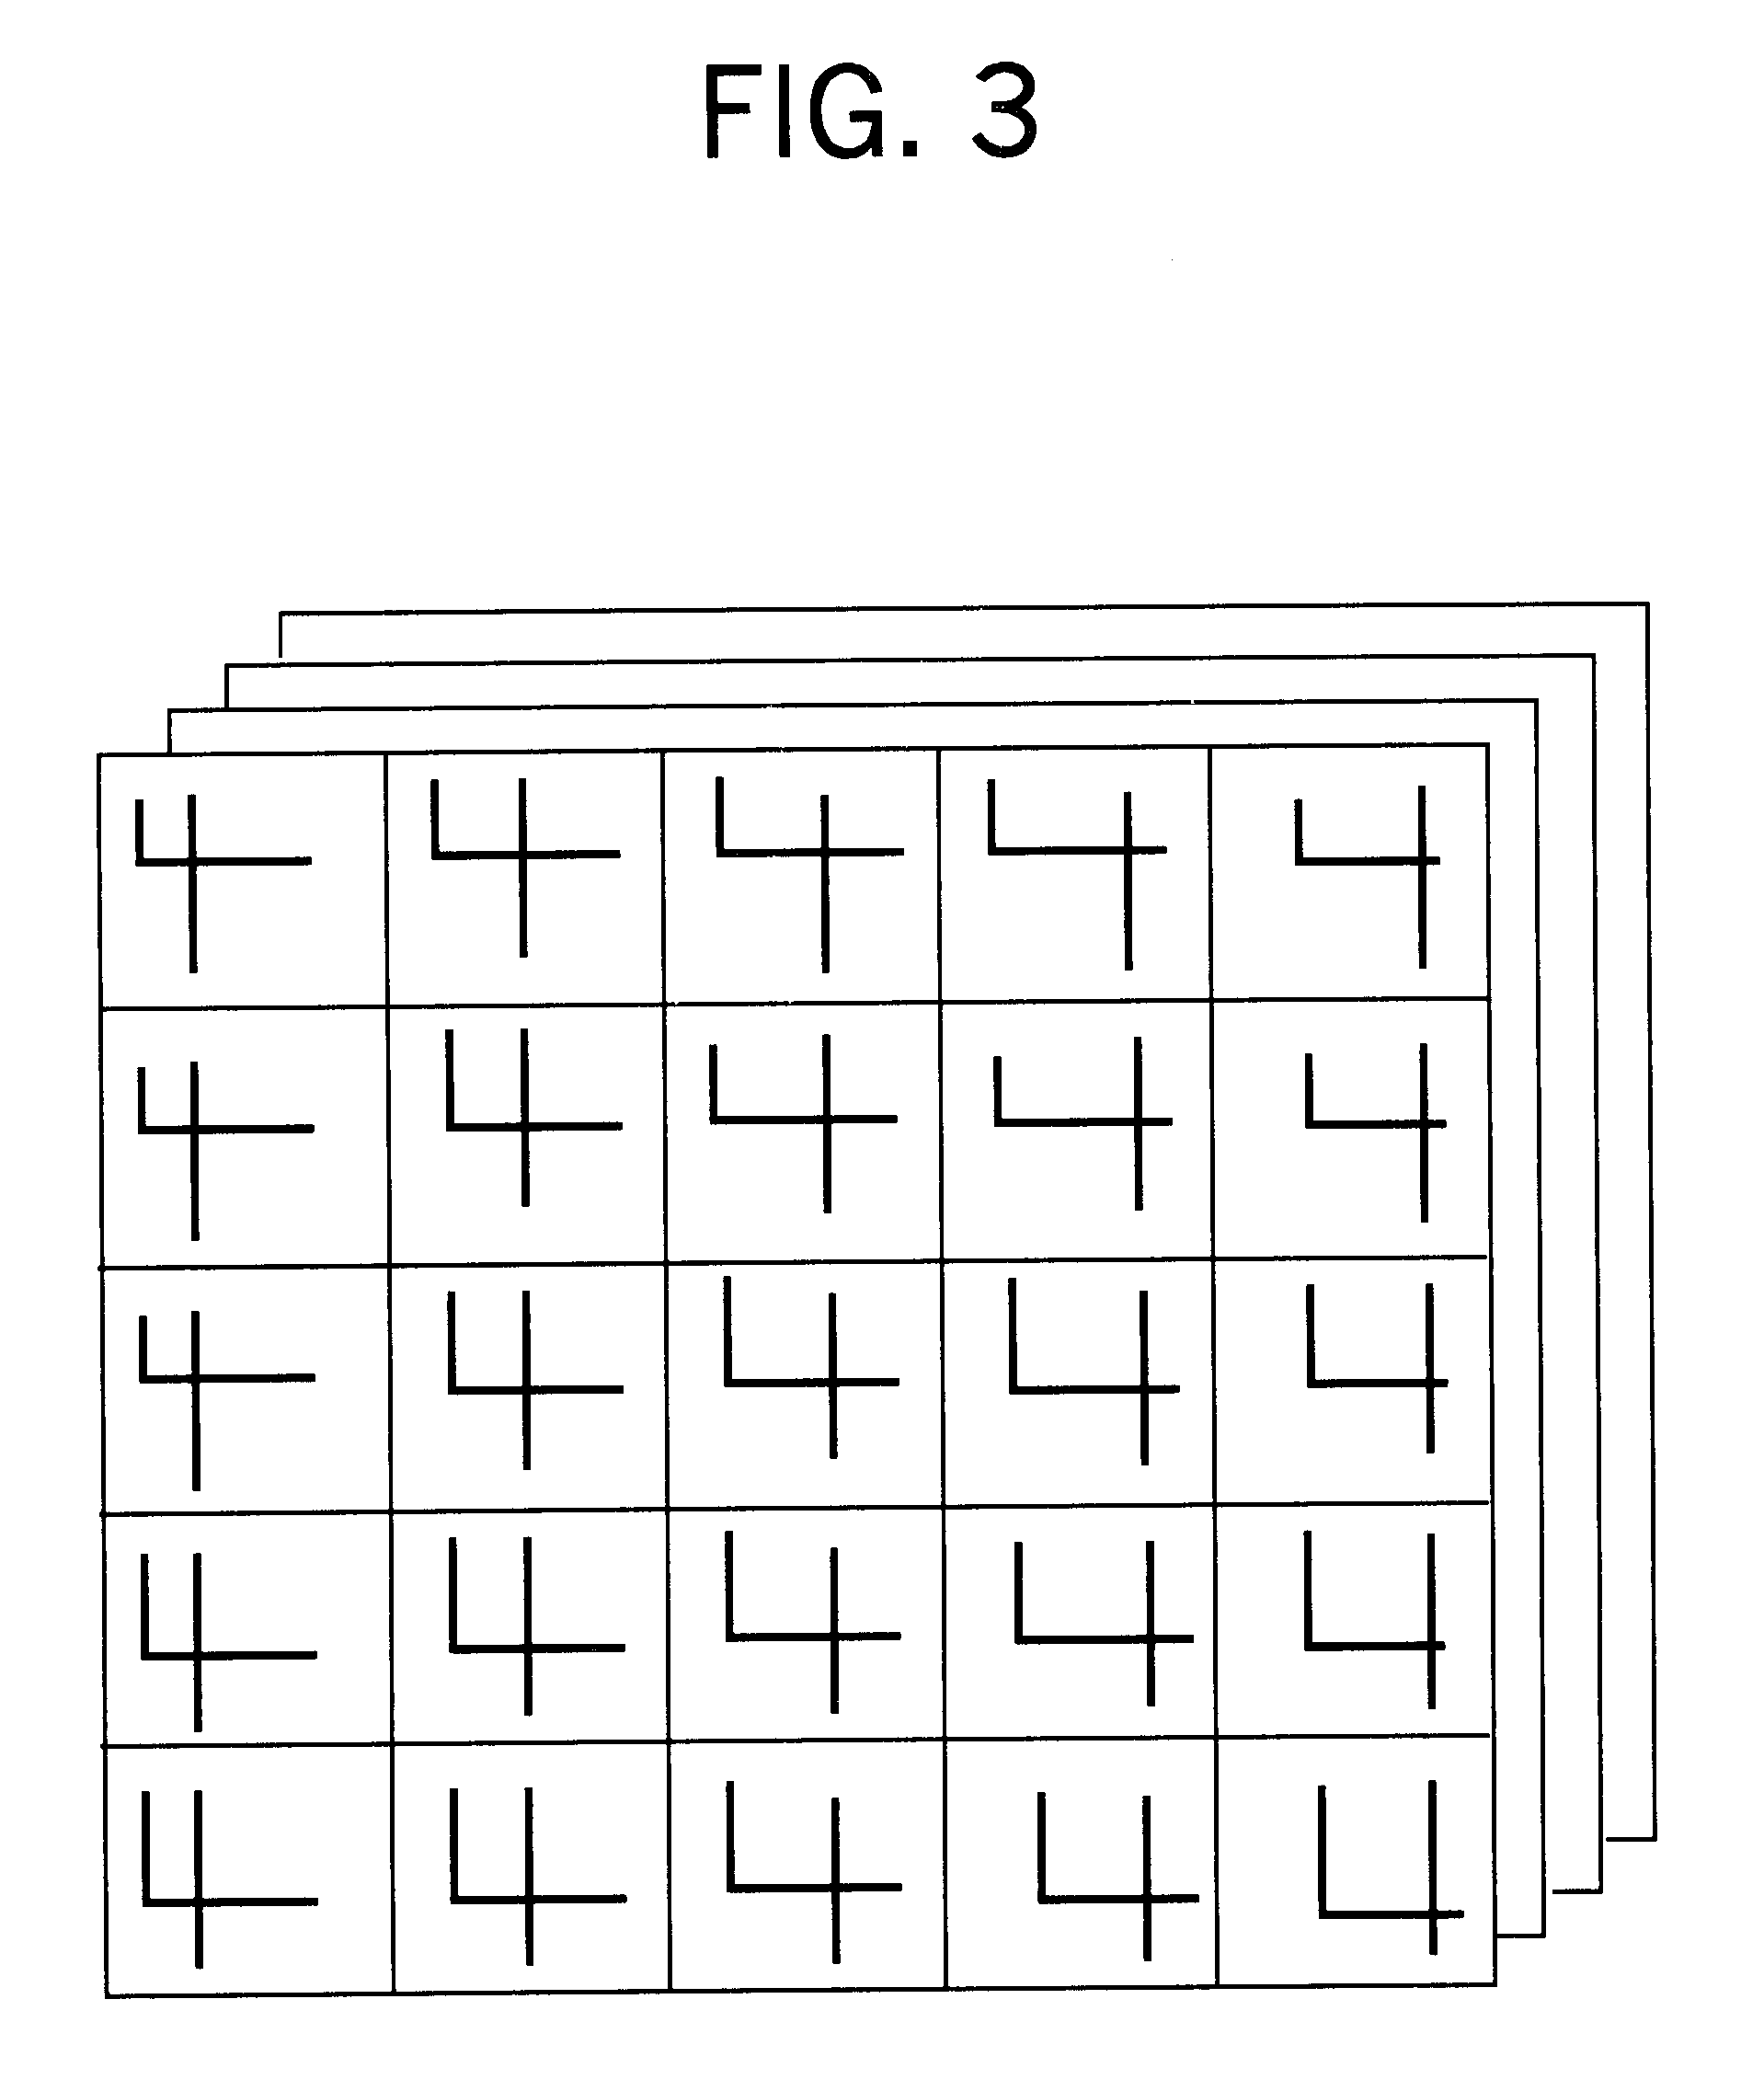 Process and equipment for recognition of a pattern on an item presented